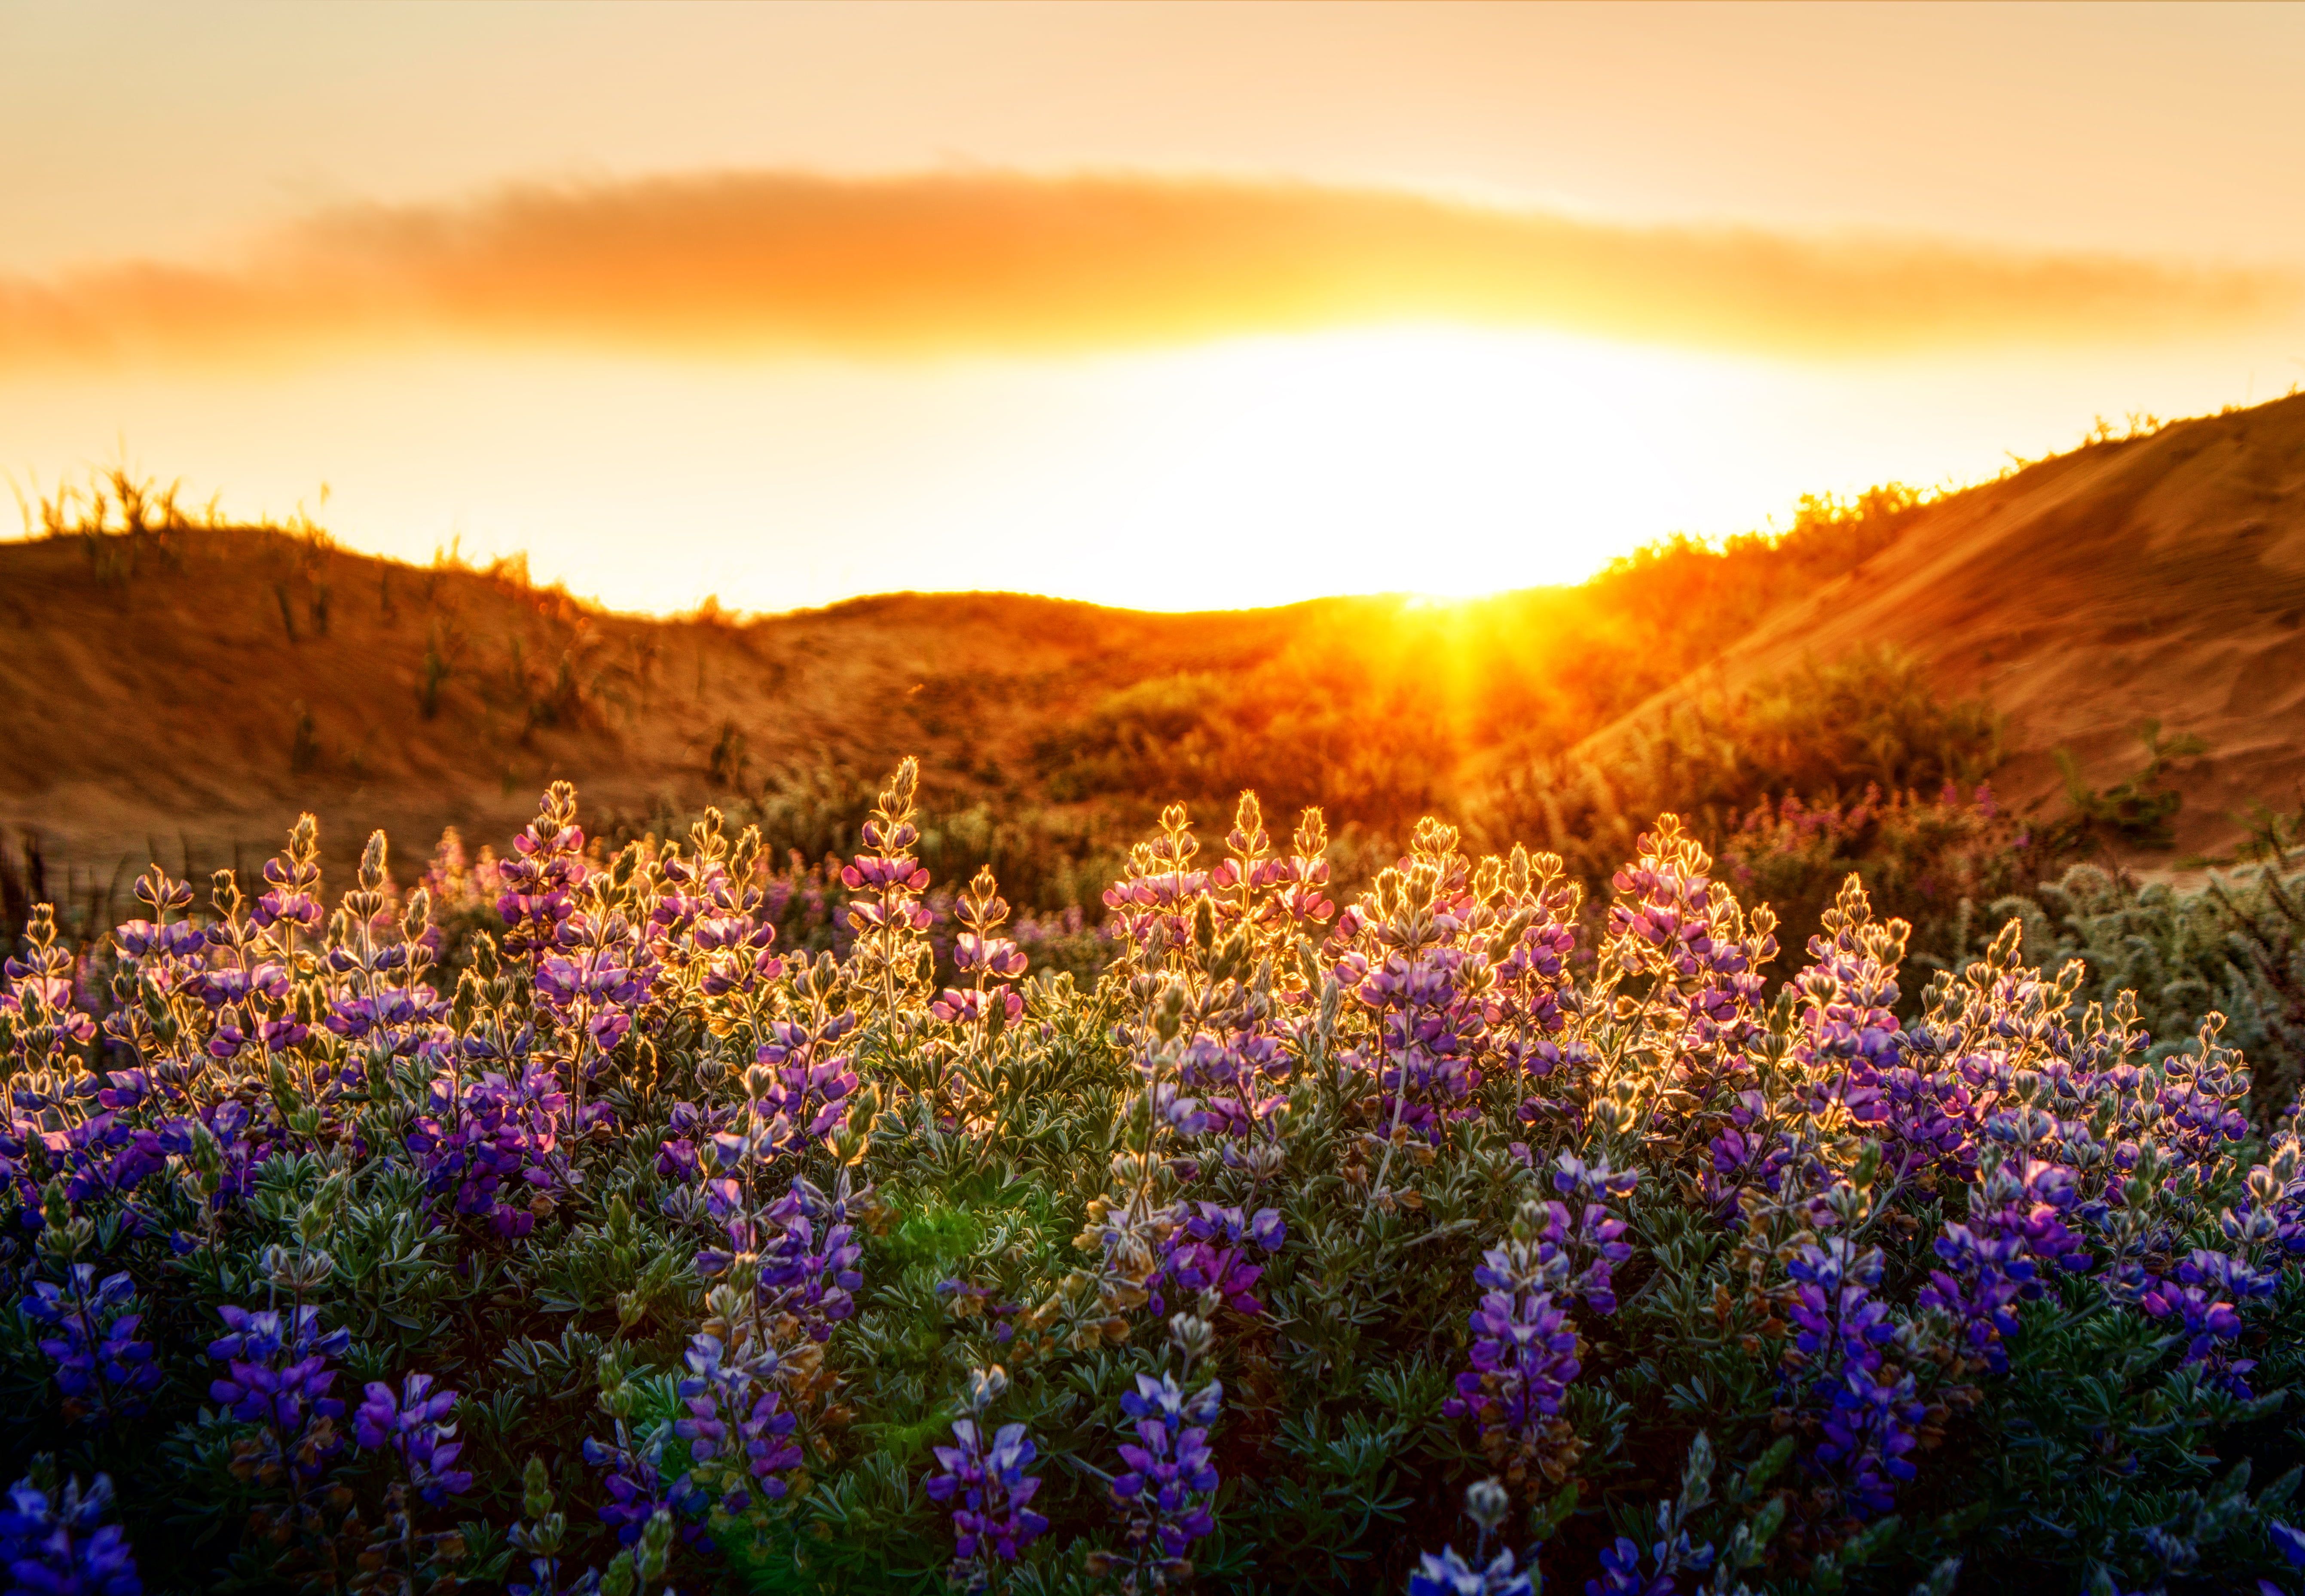 Bed of purple petaled flower with golden hour background, lupines